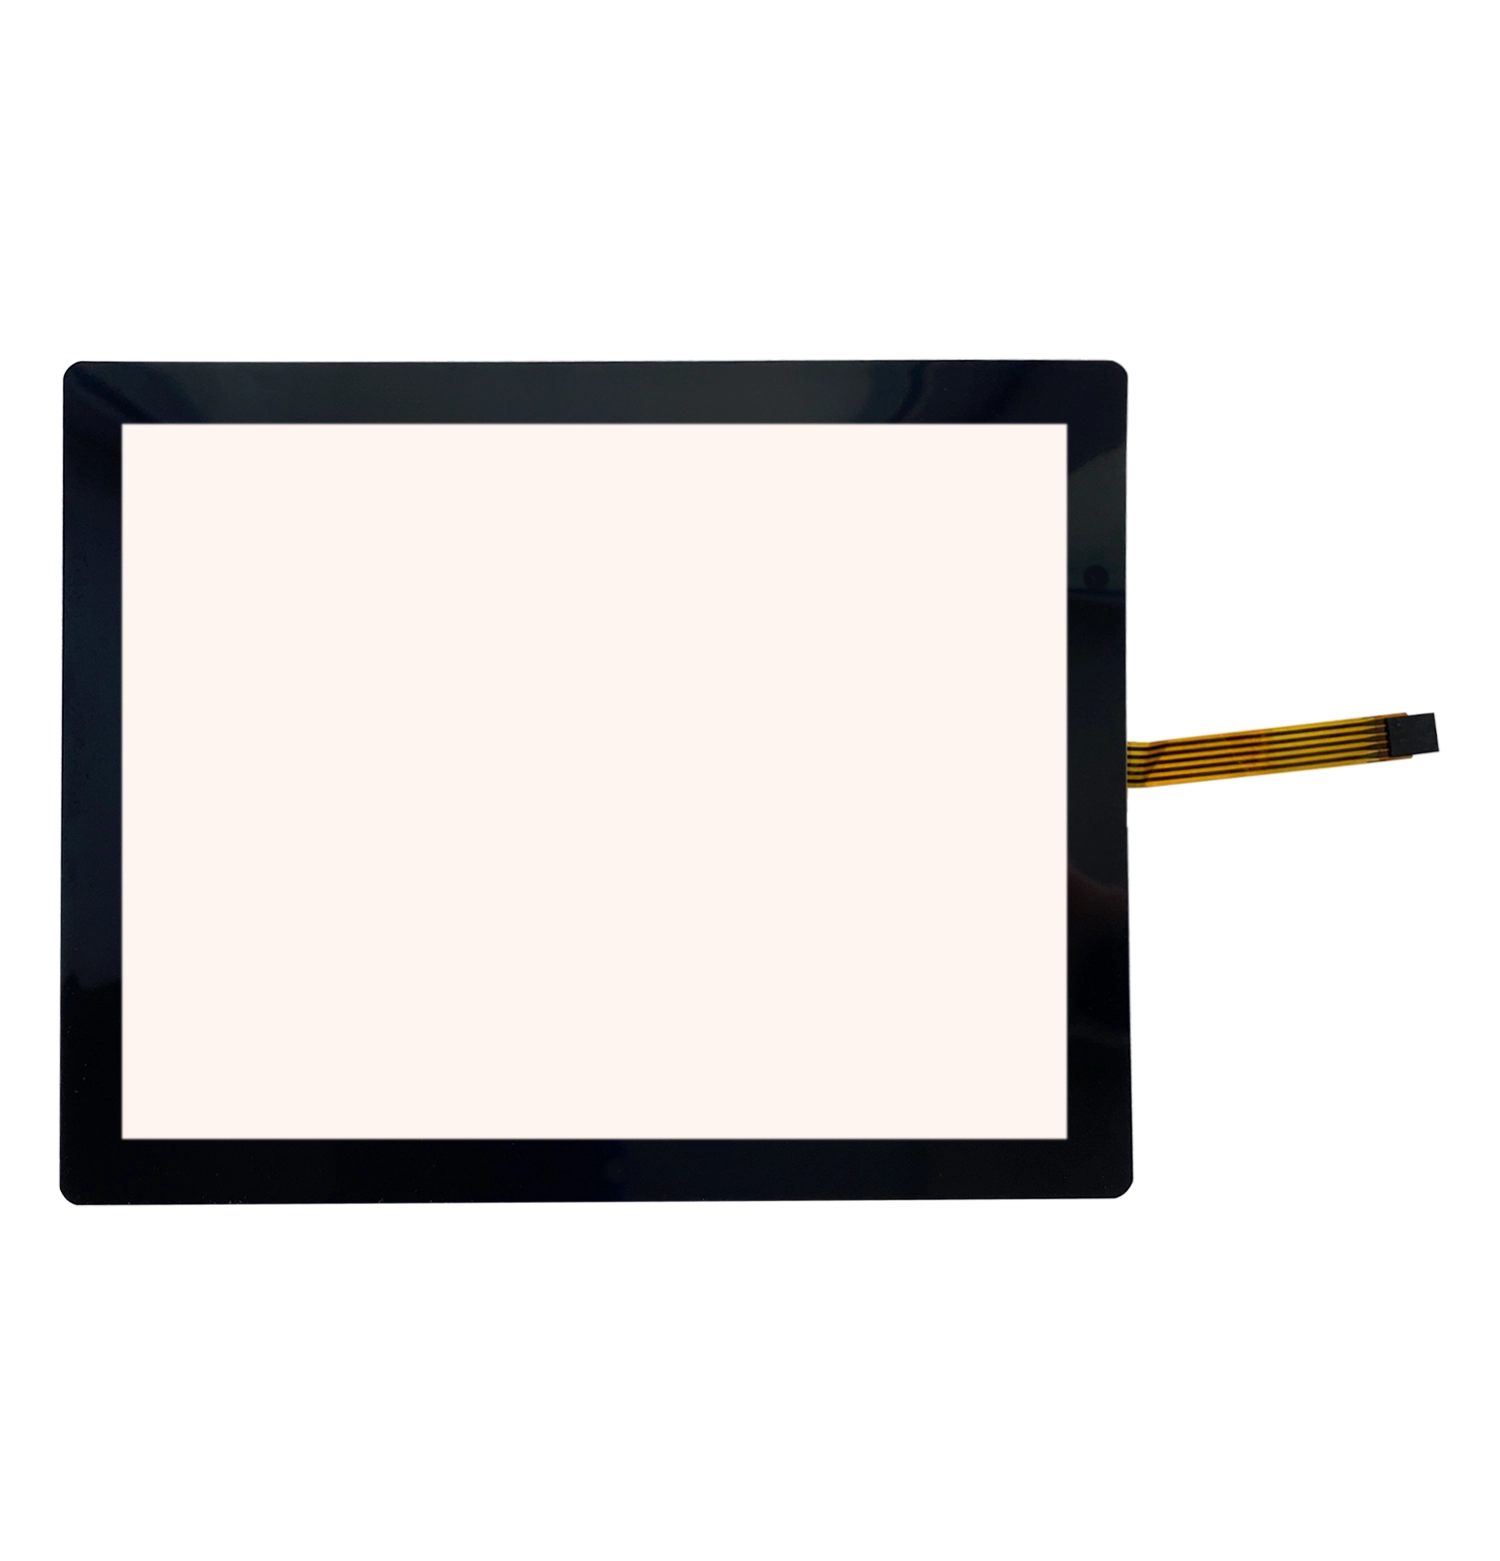 RESISTIVE TOUCH SCREEN KEETOUCH GMBH 15,1" KP-151-RP00052 NEO BLACK